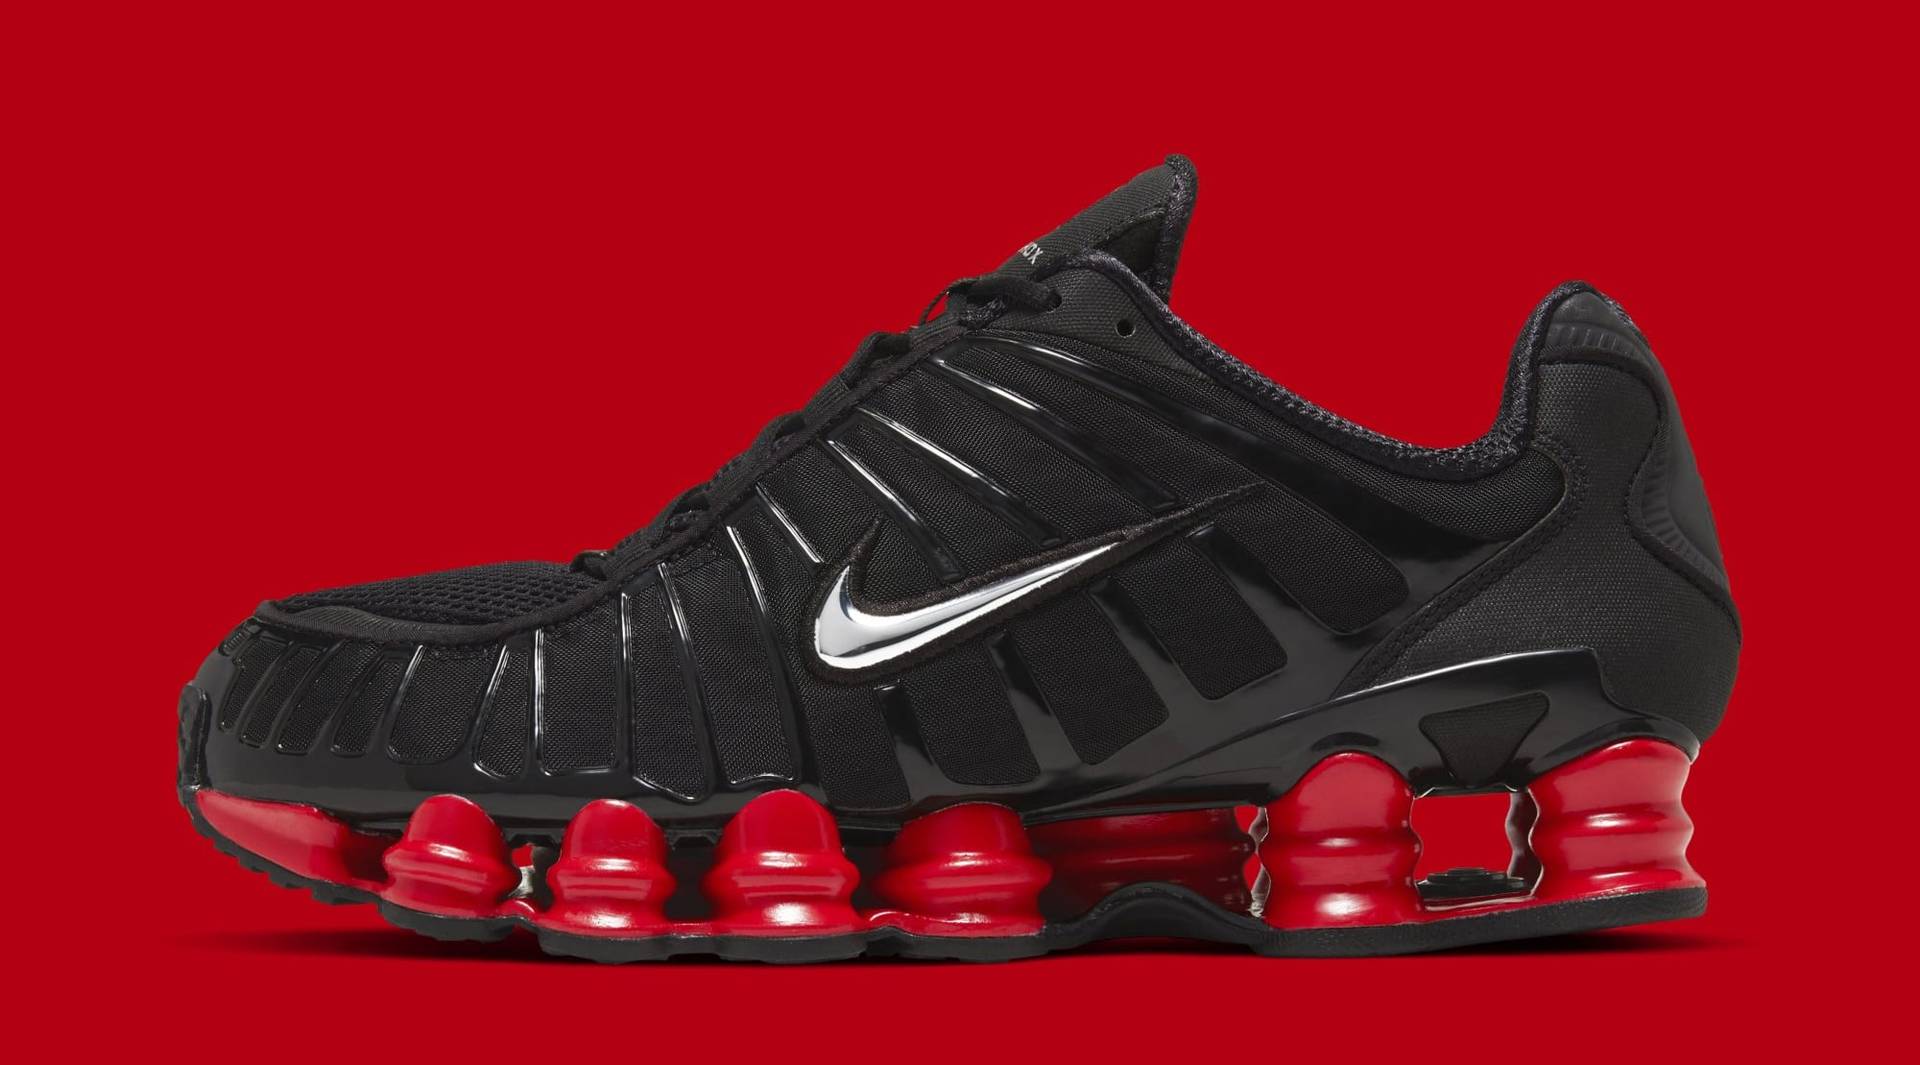 Nike Shox TL Collab Sneaker Could Be Dropping Soon – PAUSE Online | Men's Fashion, Street Style, Fashion News & Streetwear